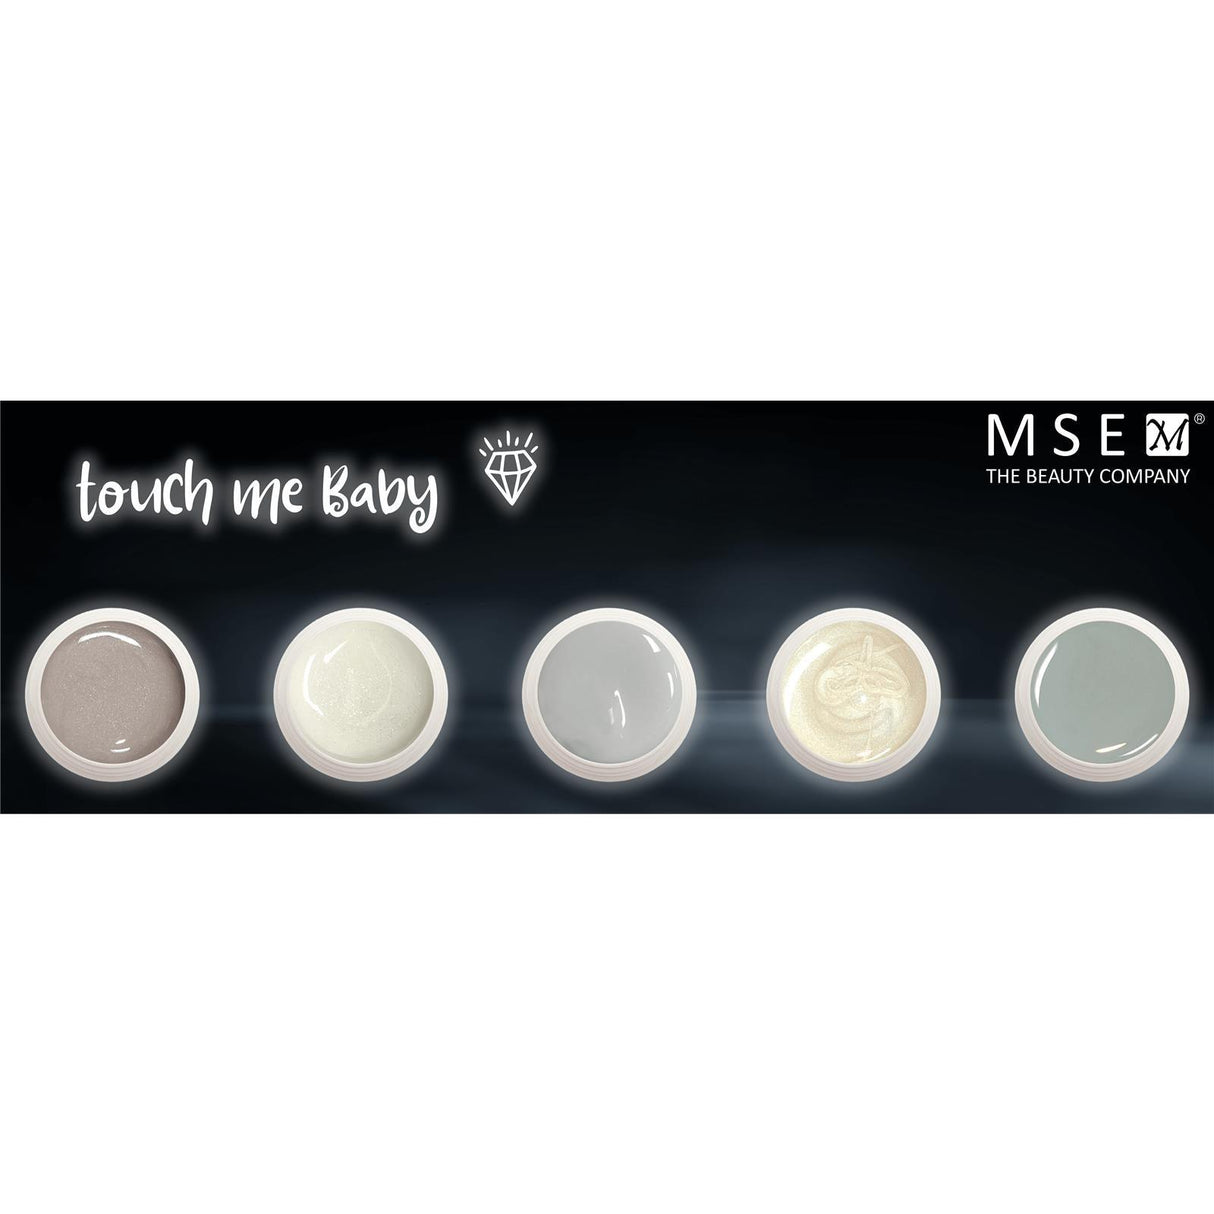 Farbgel Set: touch me baby - MSE - The Beauty Company